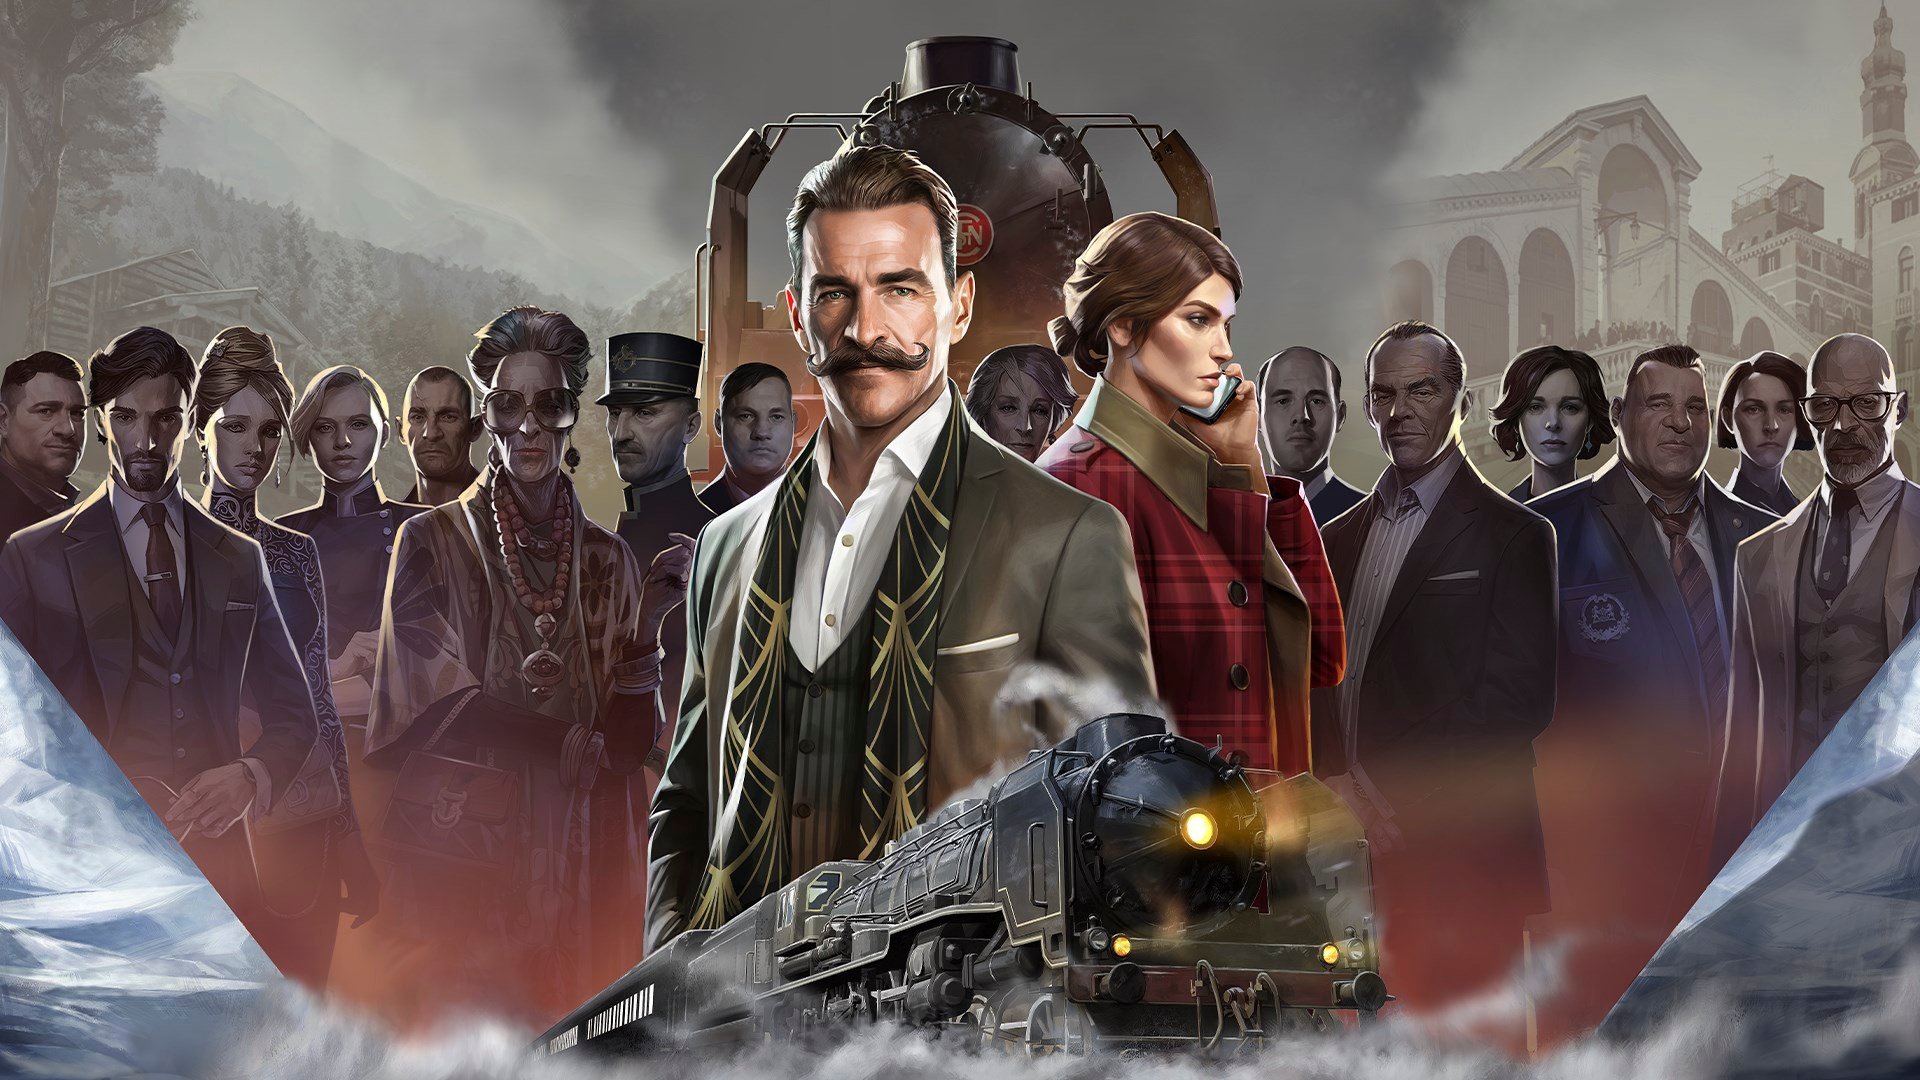 Agatha Christie - Murder on the Orient Express cover image